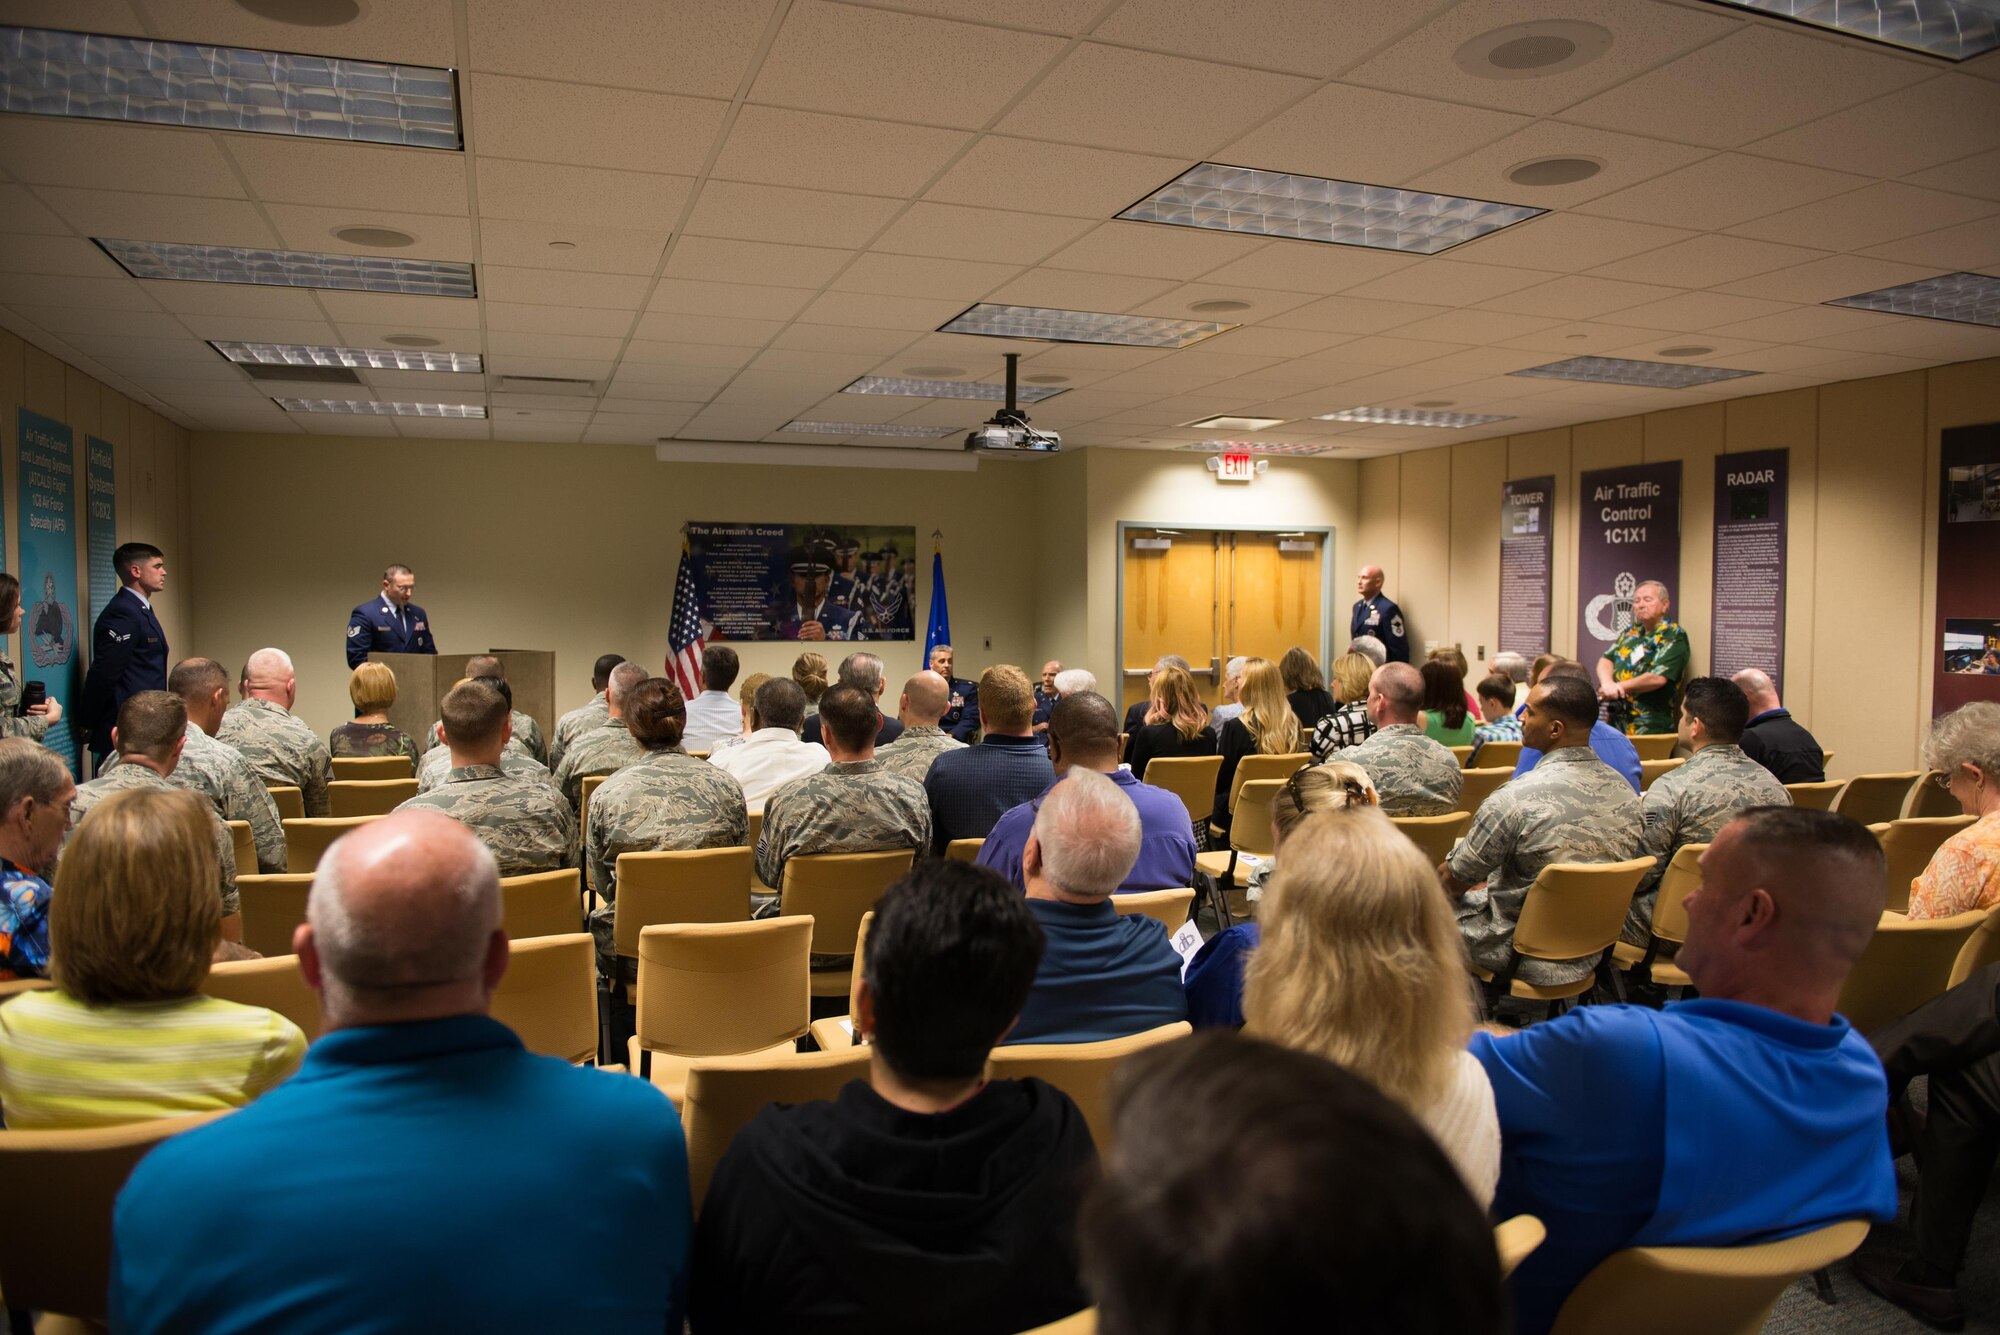 Keesler personnel attend a room dedication ceremony for Retired Chief Warrant Officer 4 Francis Herbert in Cody Hall April 26, 2016, Keesler Air Force Base, Miss. The tower lab room in Cody Hall was dedicated to him for his 50 years of service in air traffic control when he served from 1942-1972, then as a Keesler civilian instructor for 20 years. (U.S. Air Force photo by Marie Floyd)